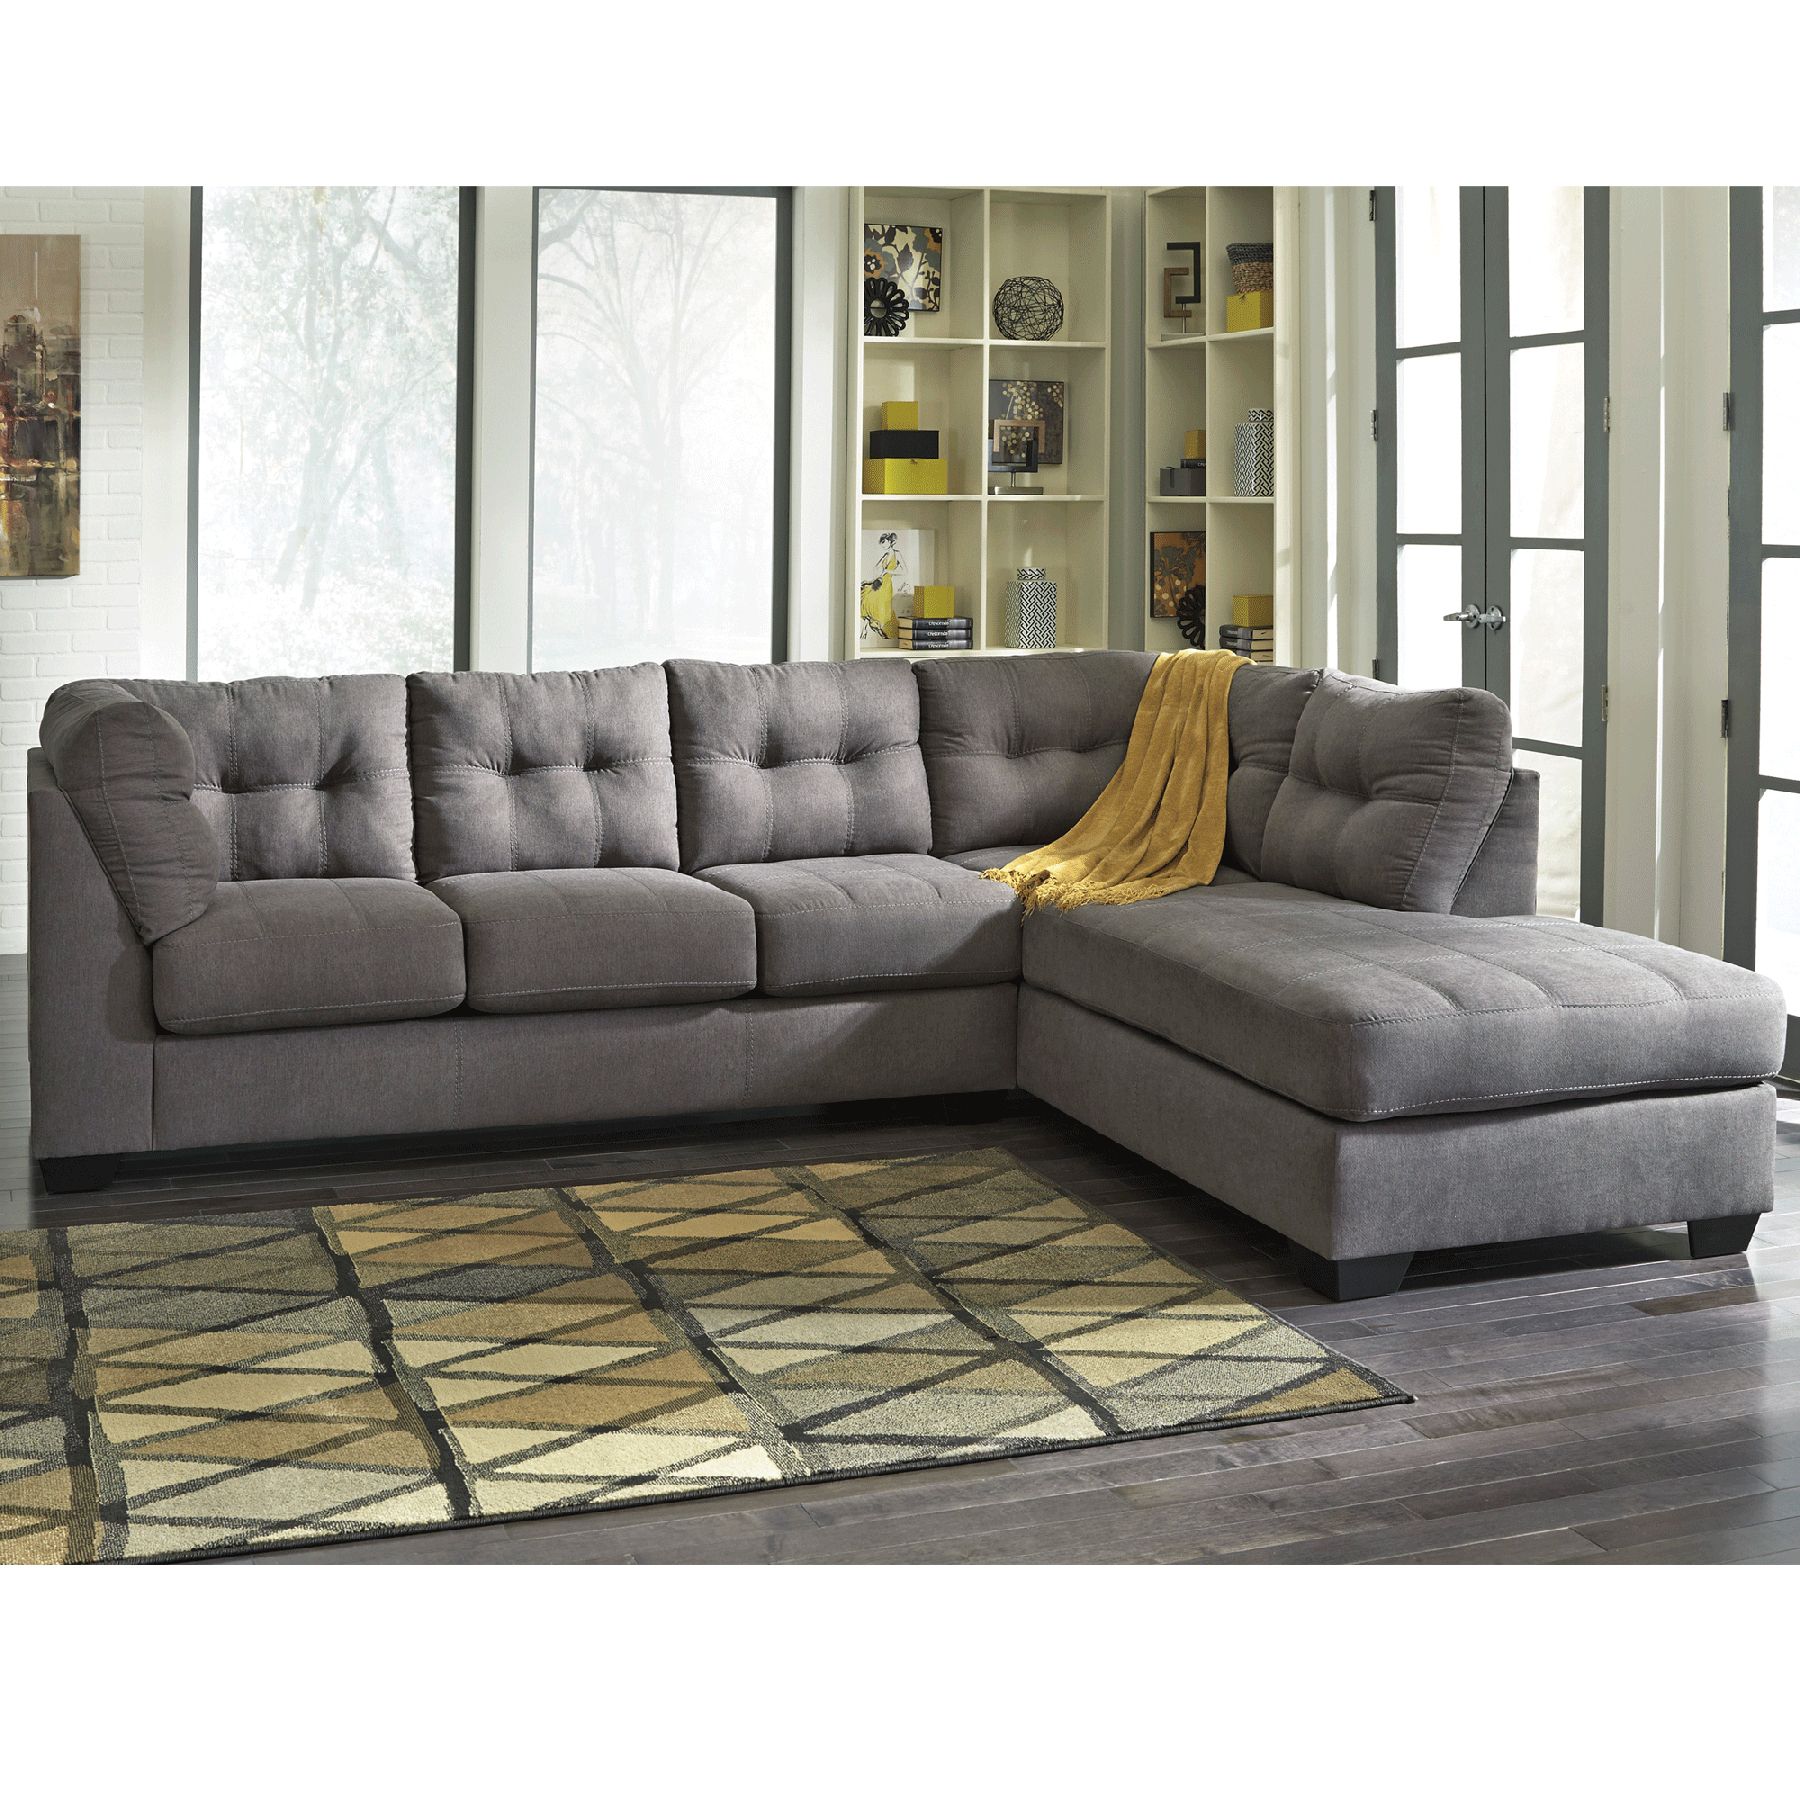 Maier Charcoal 2 Piece Sectional – Bernie & Phyl'S With Regard To 2Pc Burland Contemporary Sectional Sofas Charcoal (View 2 of 15)